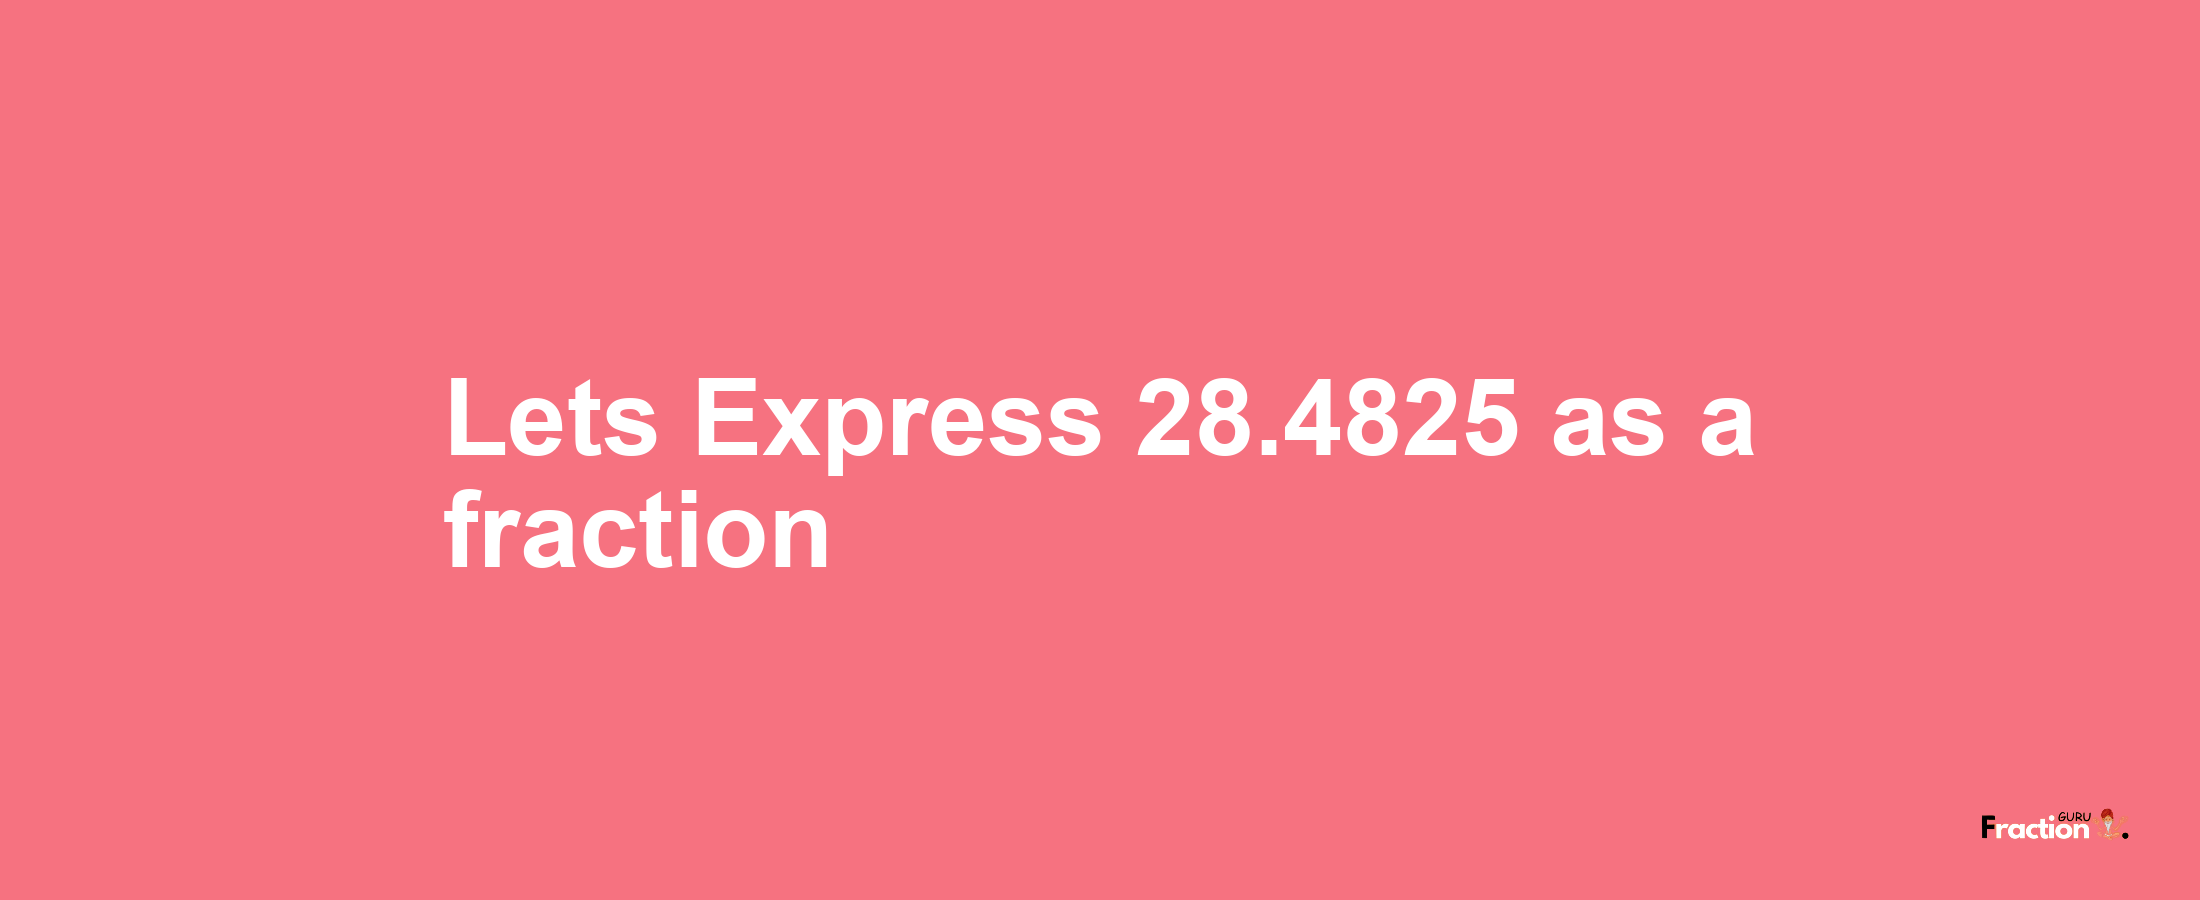 Lets Express 28.4825 as afraction